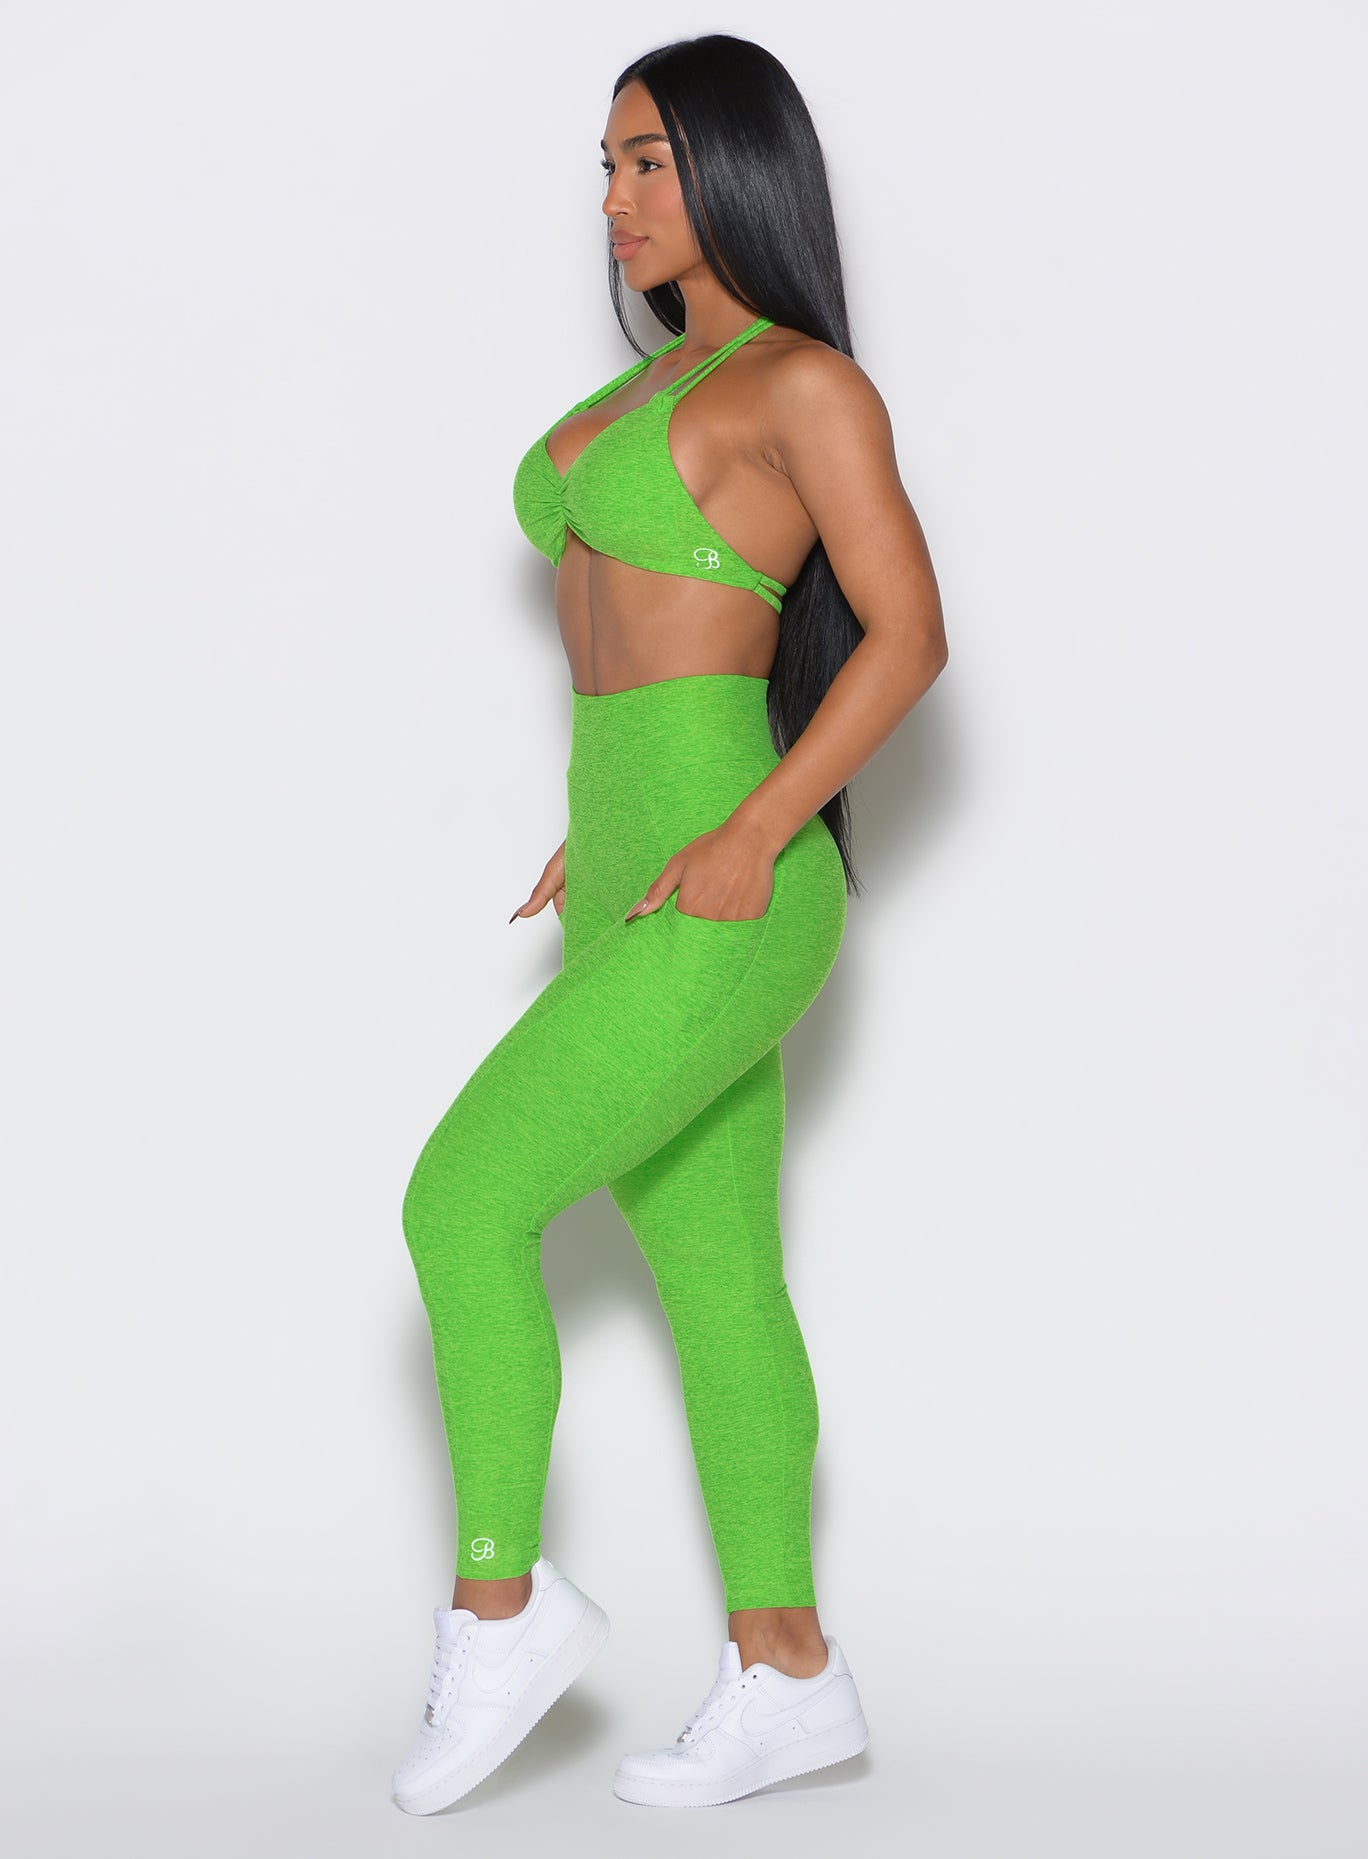 left side profile view of a model facing forward wearing our curves leggings in Neon Lime Green color along with the matching sports bra